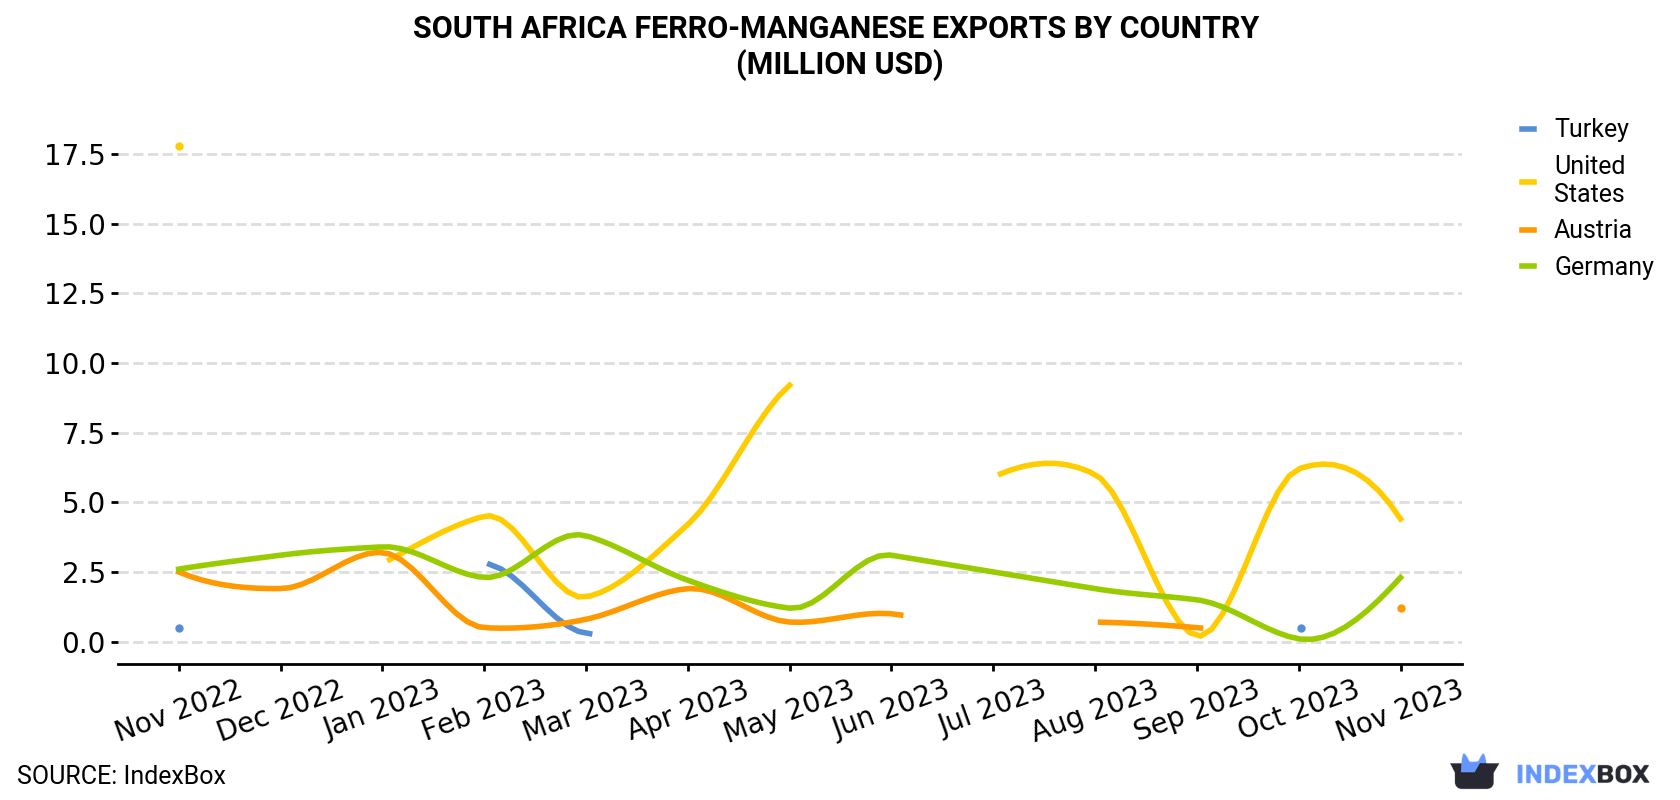 South Africa Ferro-Manganese Exports By Country (Million USD)